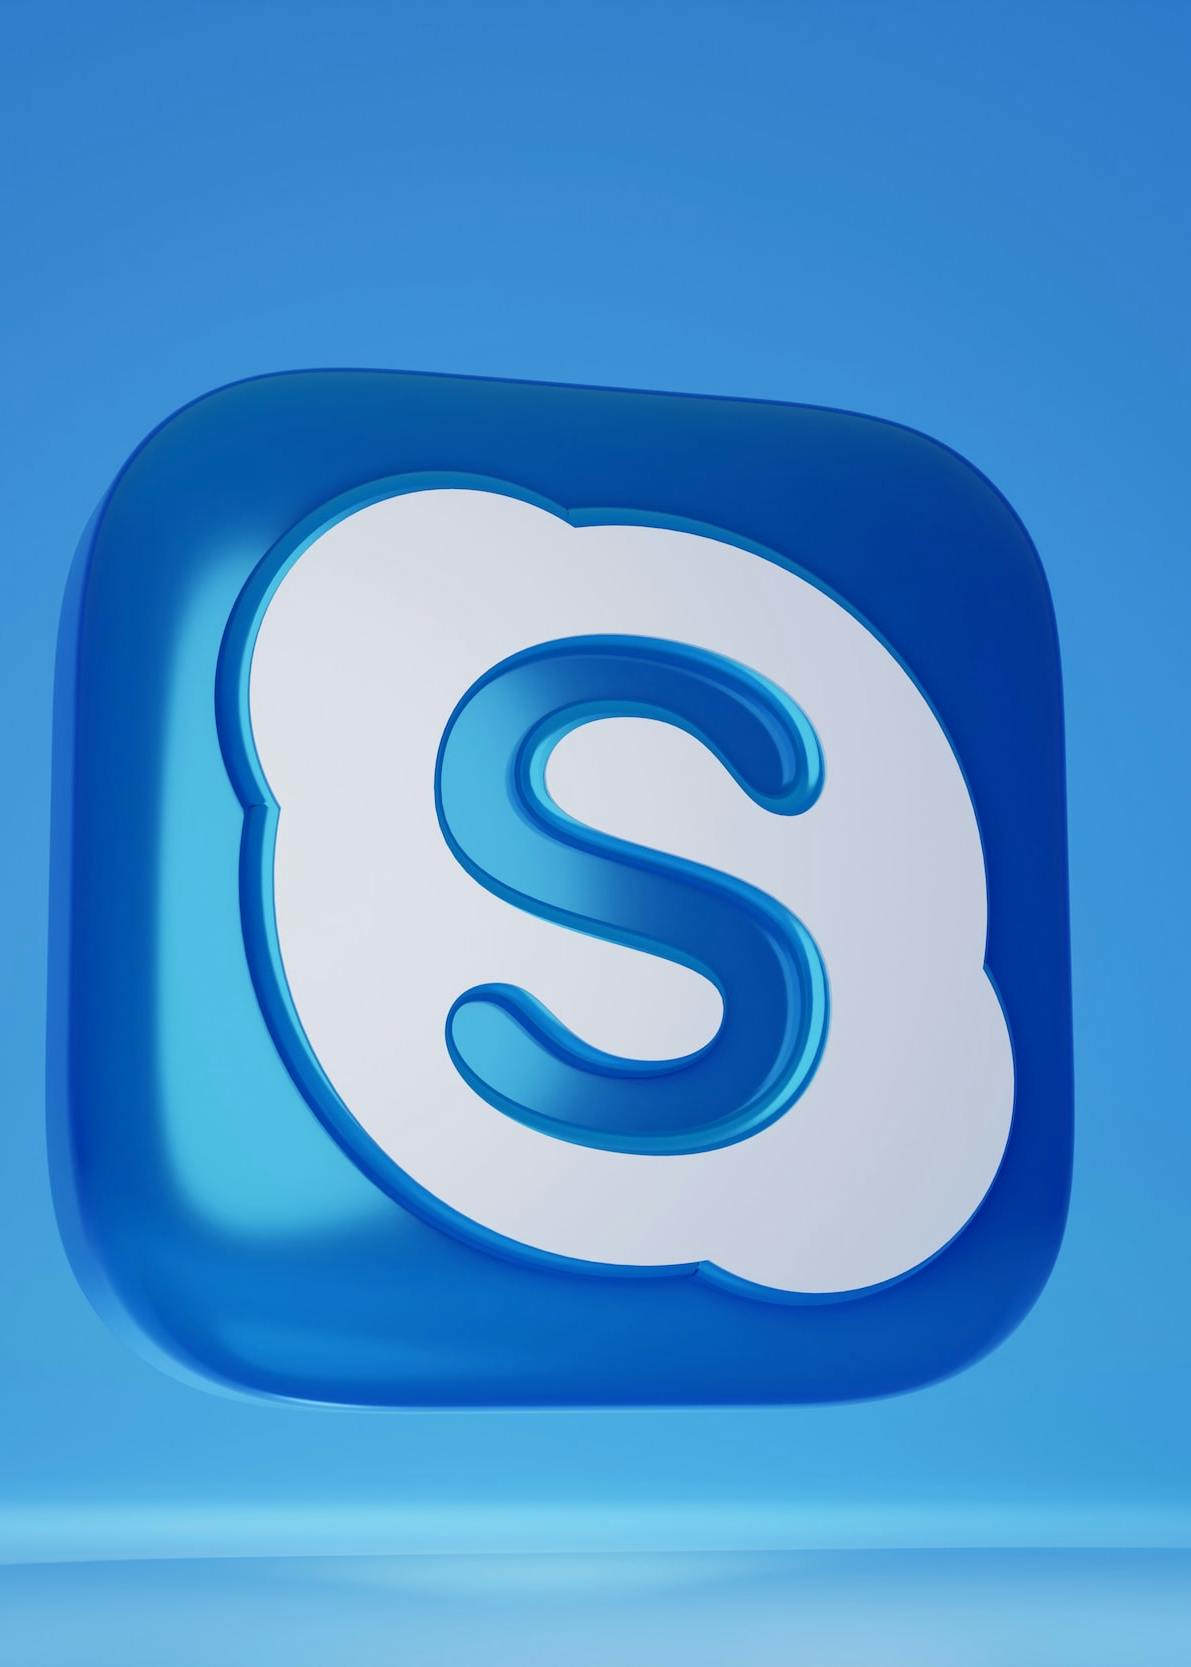 Blue and white 3D Skype logo on a light blue background.